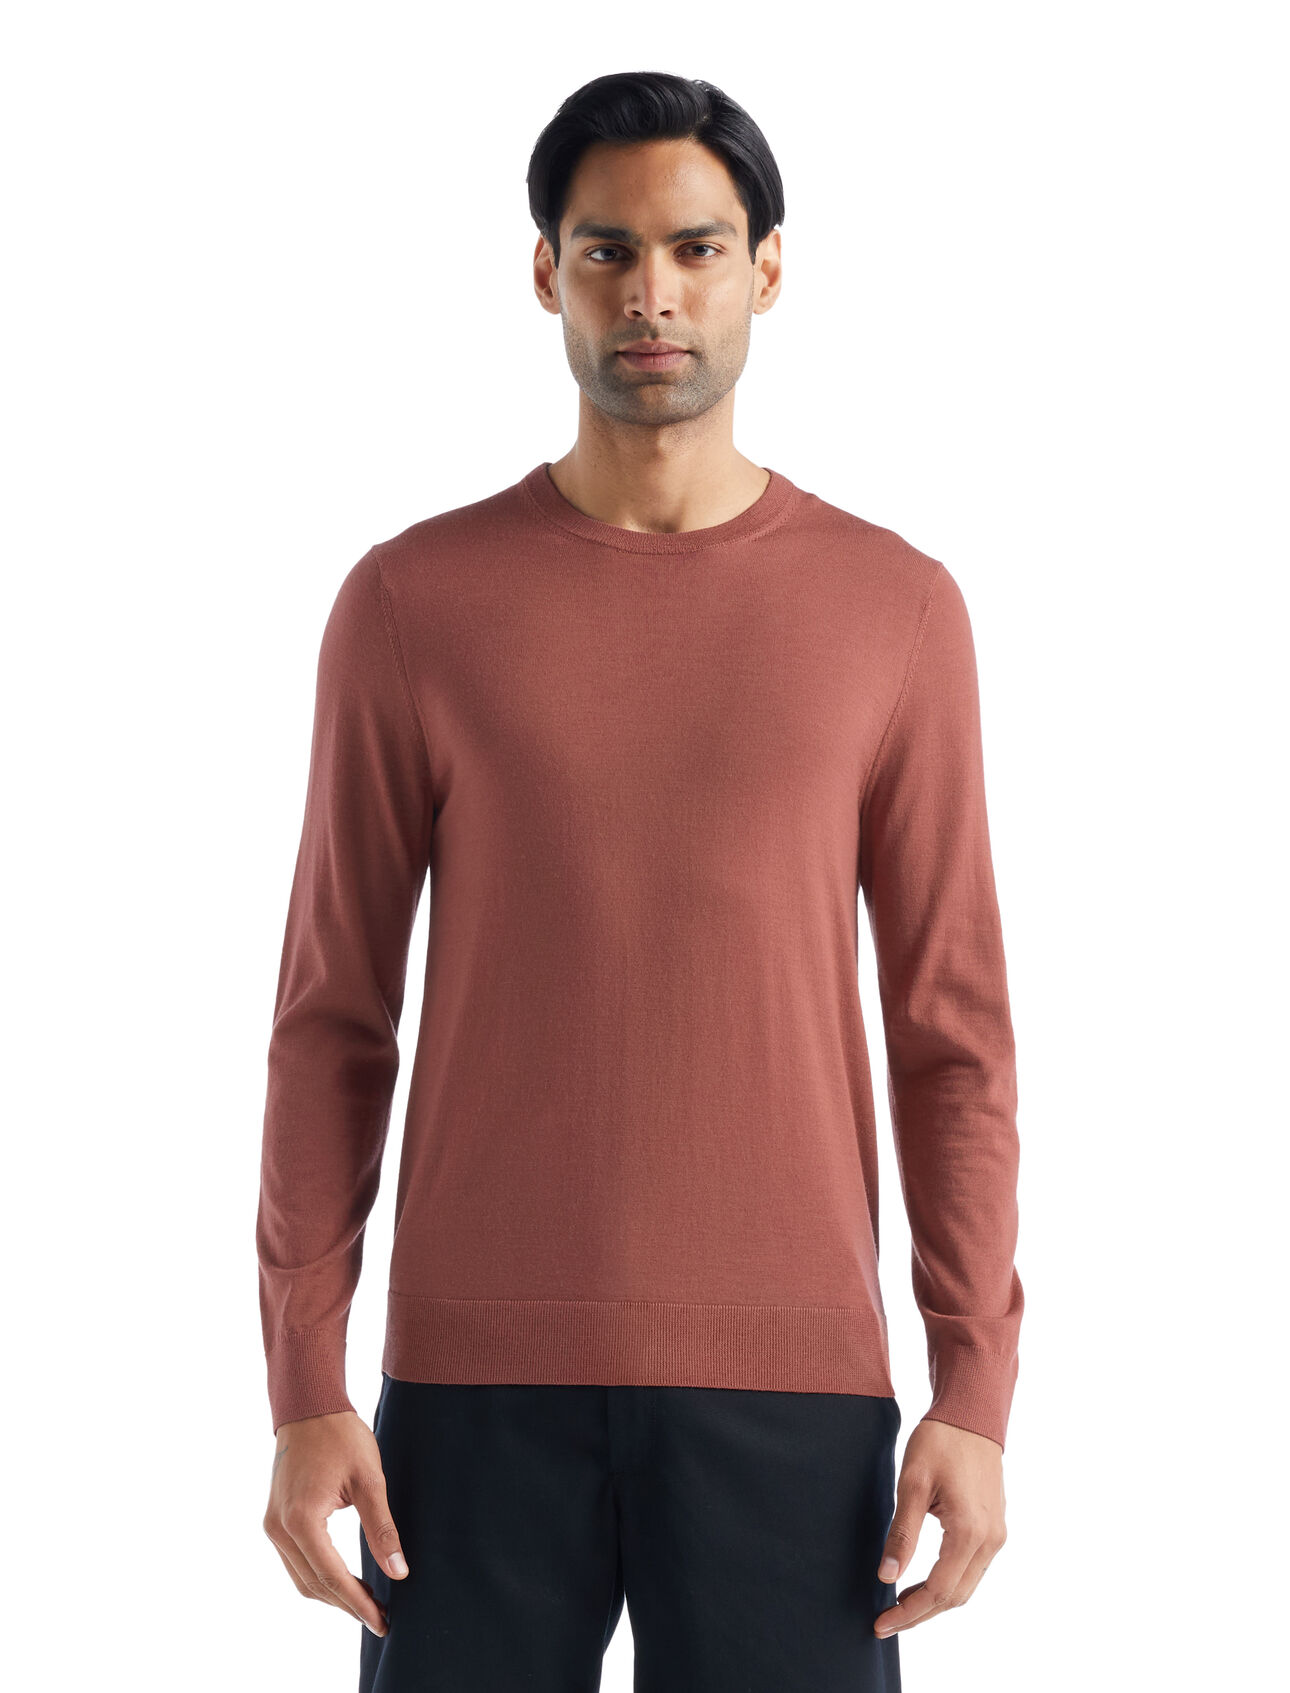 Mens Merino Wilcox Long Sleeve Sweater A classic everyday sweater made with ultra-fine gauge merino wool for unparalleled softness, the Wilcox Long Sleeve Sweater is perfect for days when you need a light extra layer.